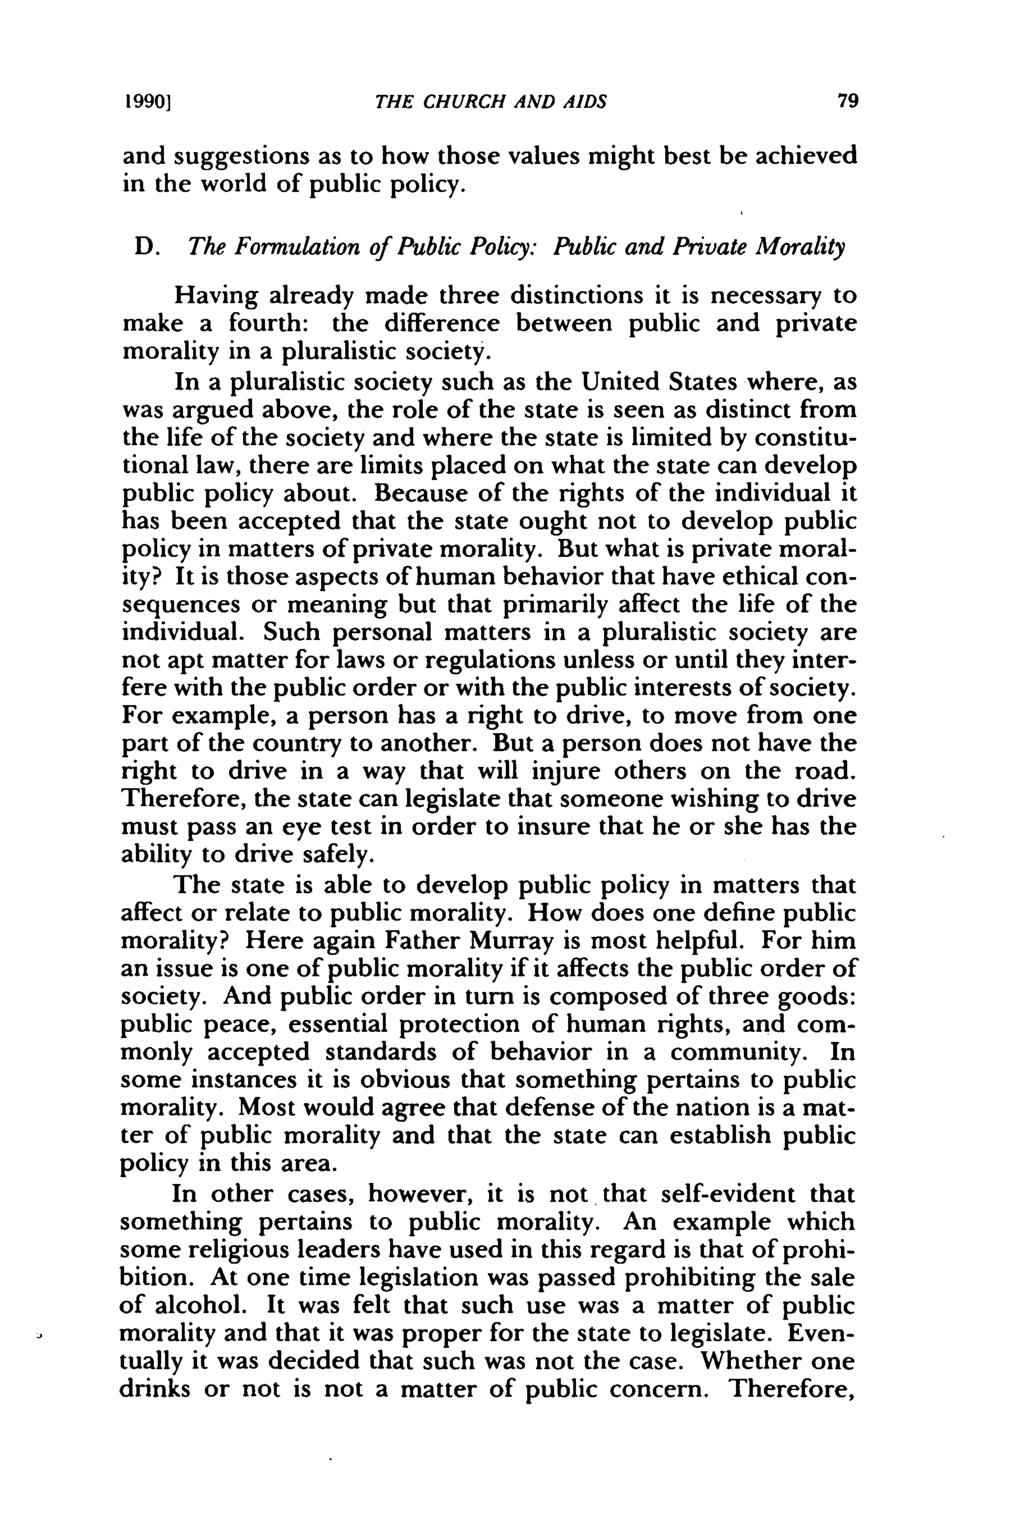 1990] THE CHURCH AND AIDS and suggestions as to how those values might best be achieved in the world of public policy. D.